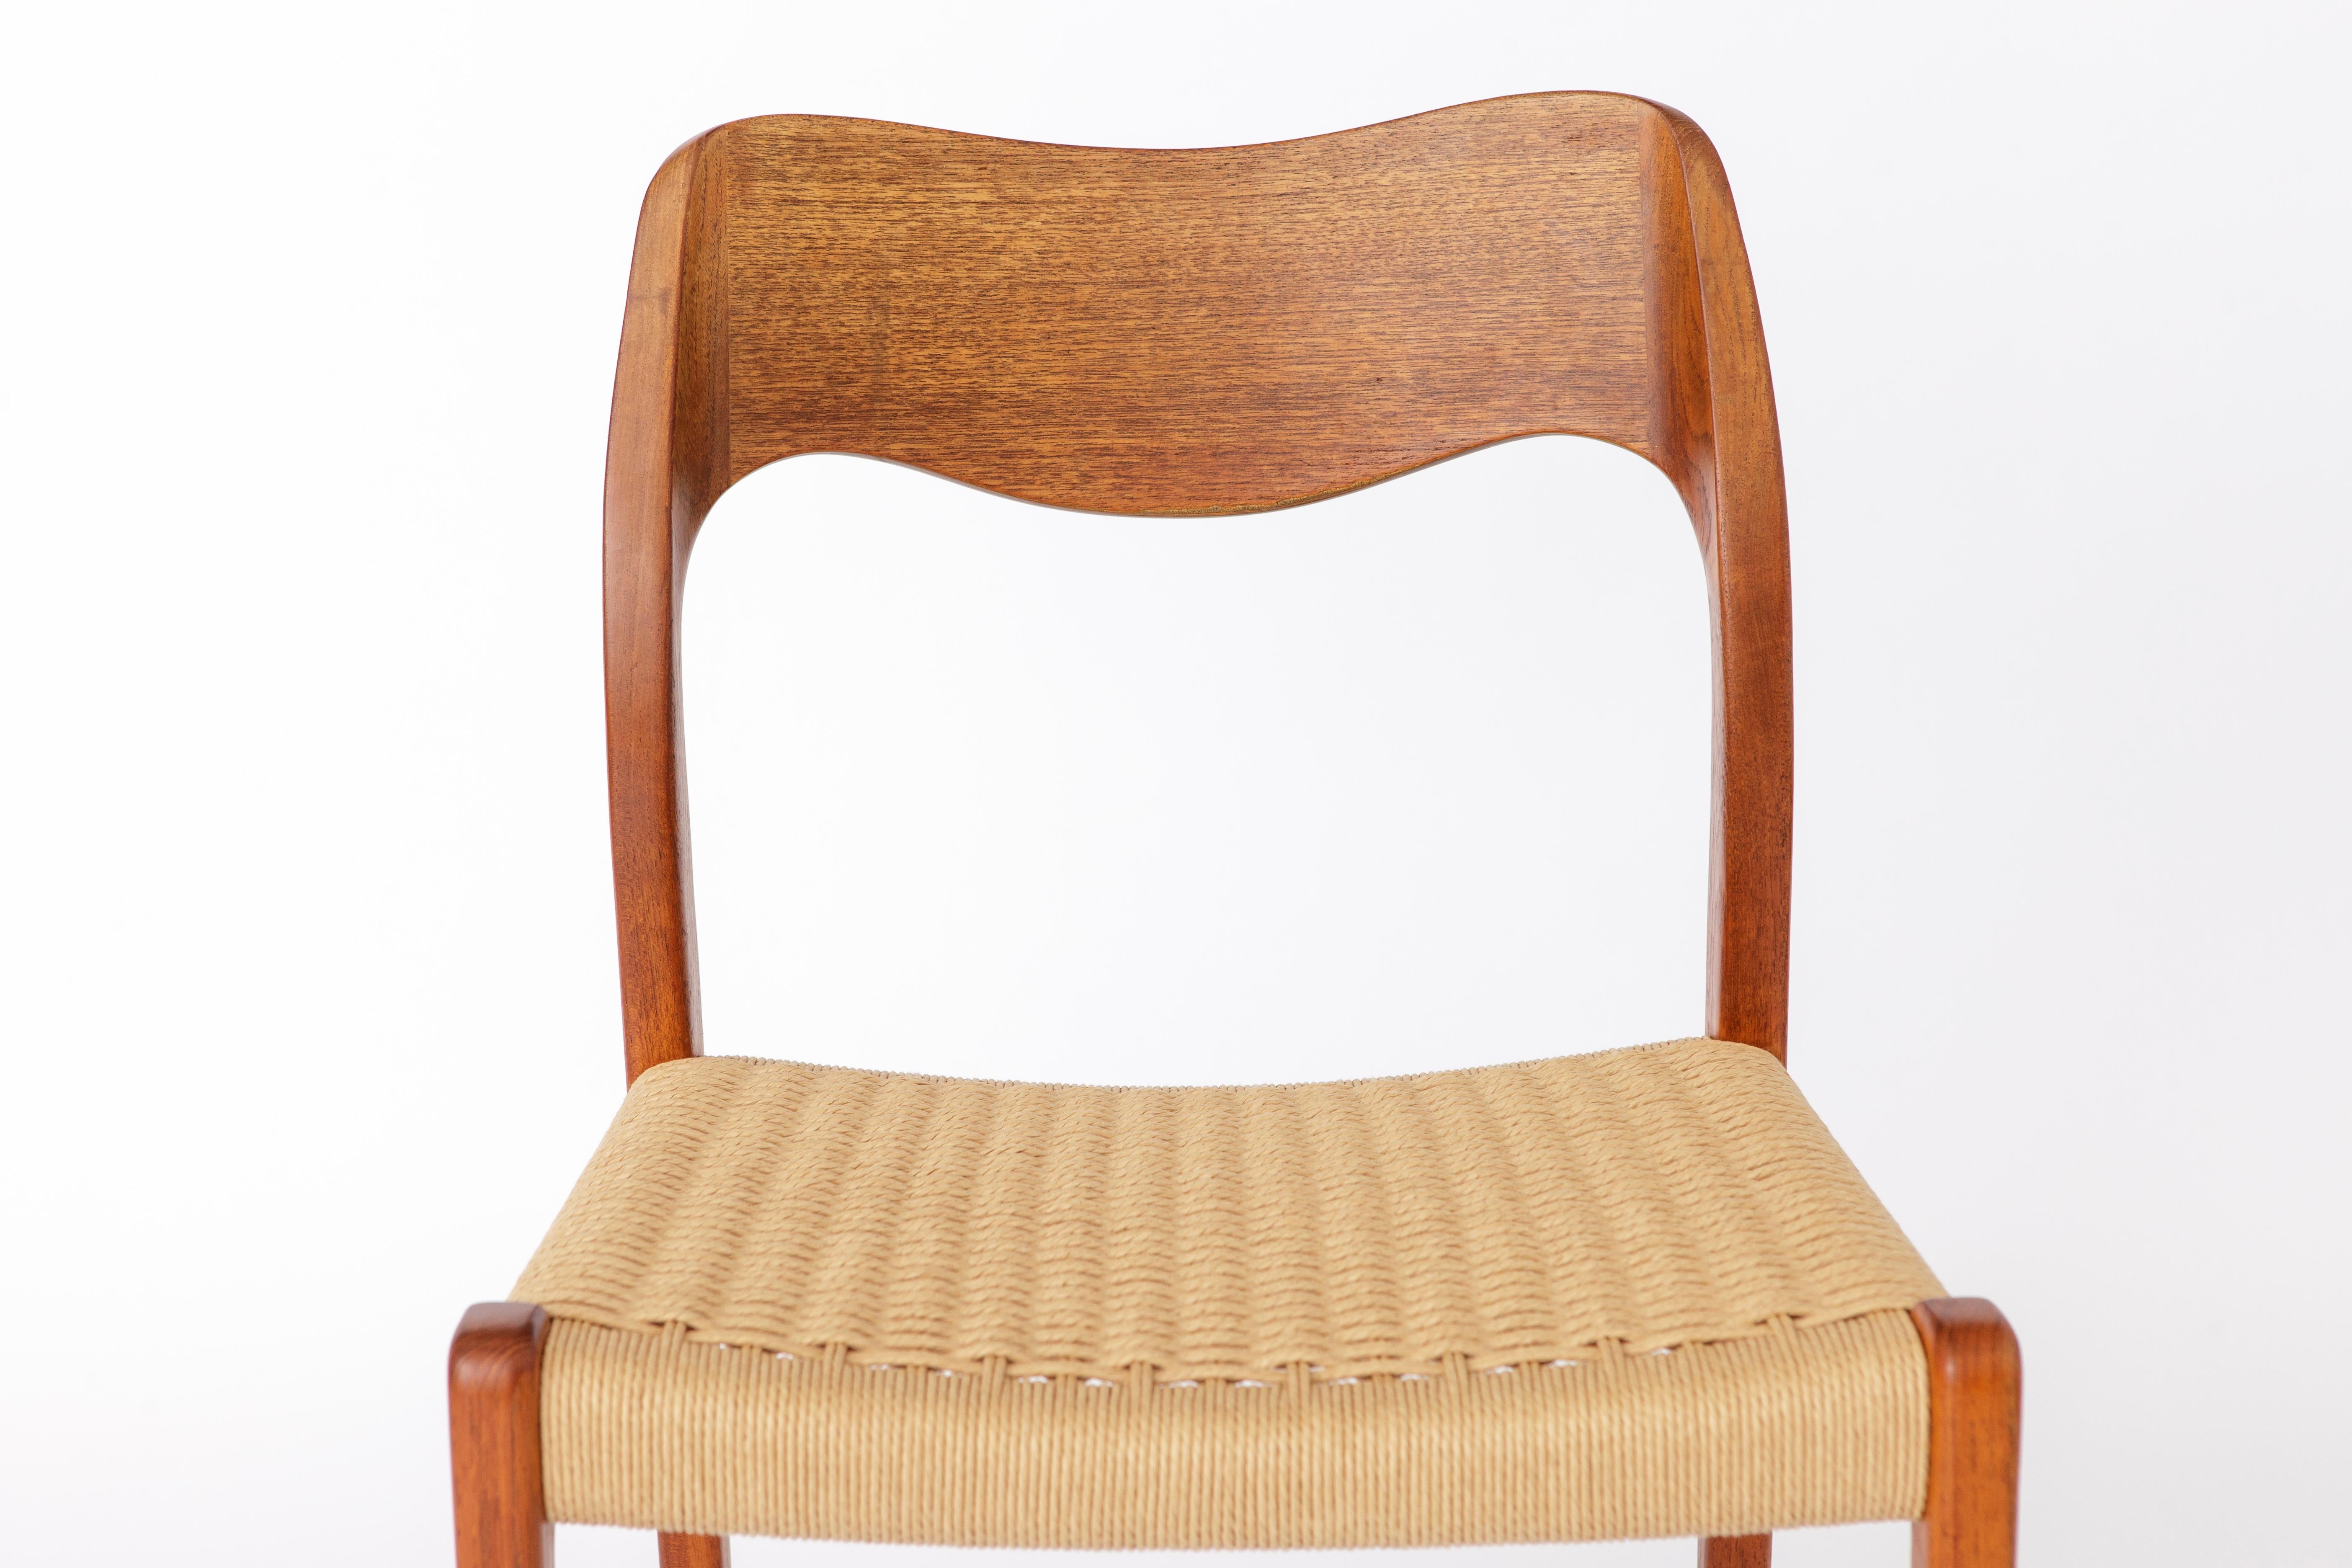 1 of 2 Niels Otto Moller Chairs. Modell 71 in Teak. 
Production period: 1950s. 
Displayed price is for 1 chairs. Totally 2 available. 

Very good condition. Stable teak frame. Refurbished and oiled. 
Seat weavings were renewed. 
Manufacturer's mark